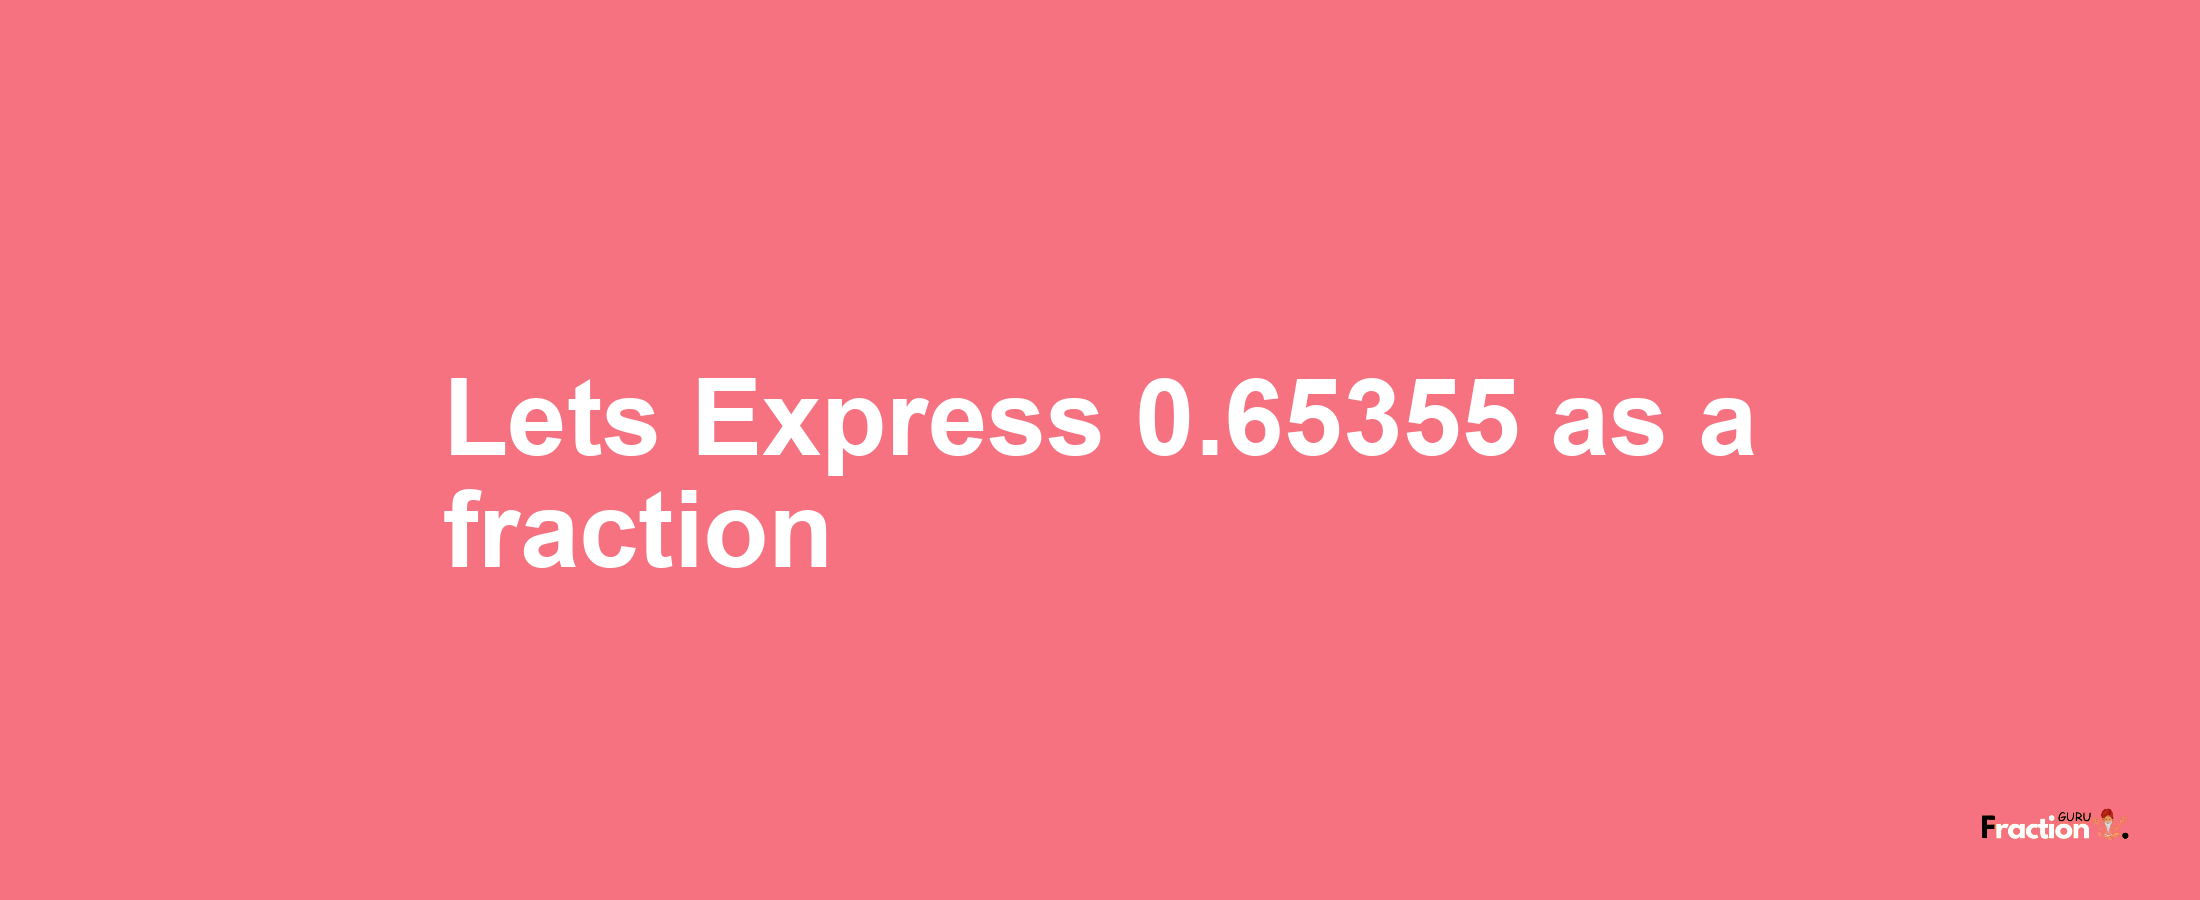 Lets Express 0.65355 as afraction